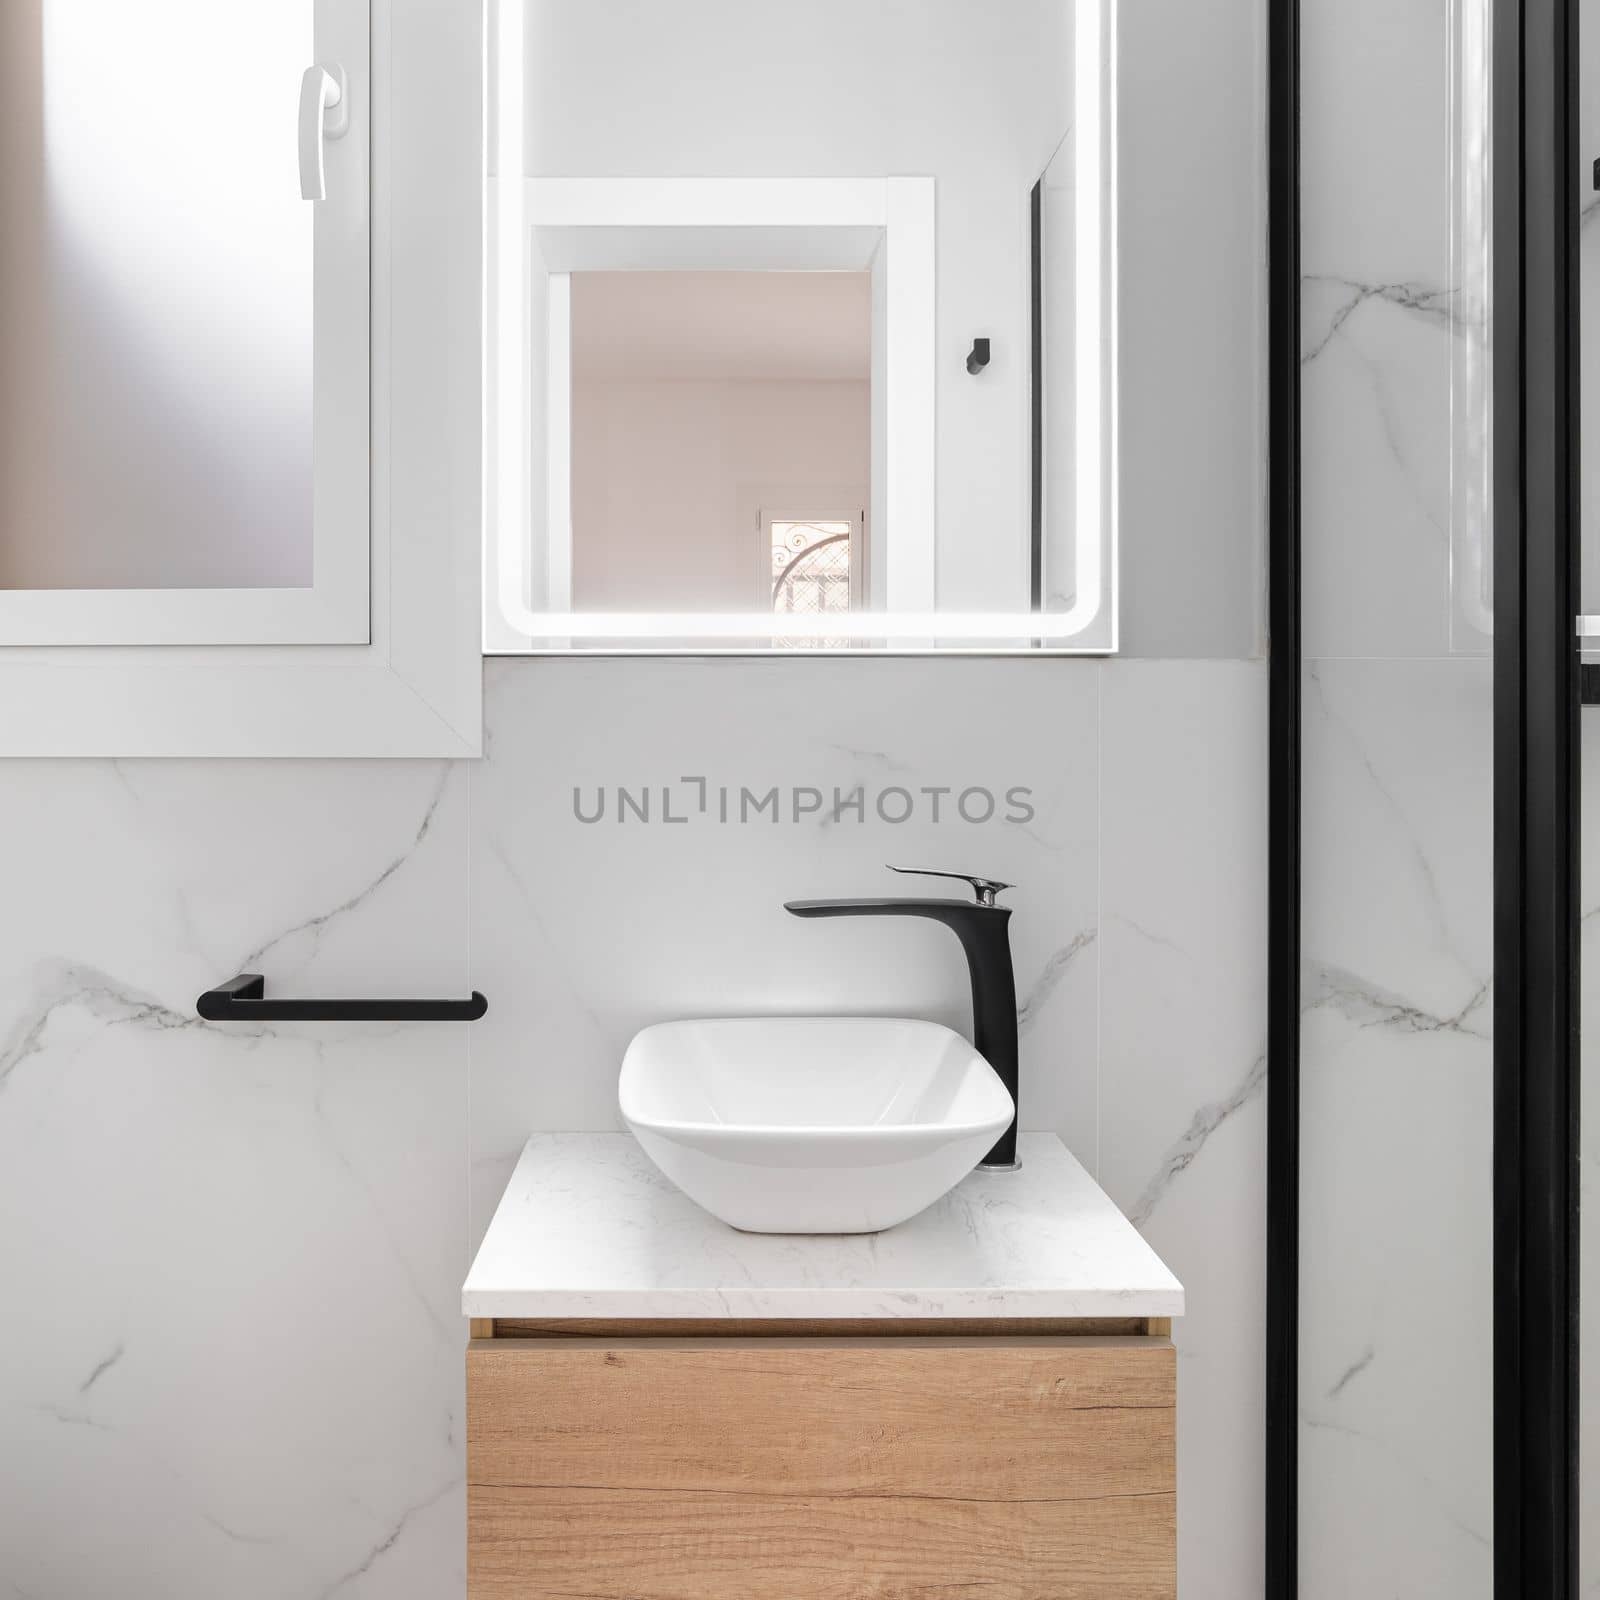 Bright bathroom boasts a sleek and minimalist style, featuring a gleaming white sink set against a stunning black framed mirror, creating a modern and sophisticated look. by apavlin